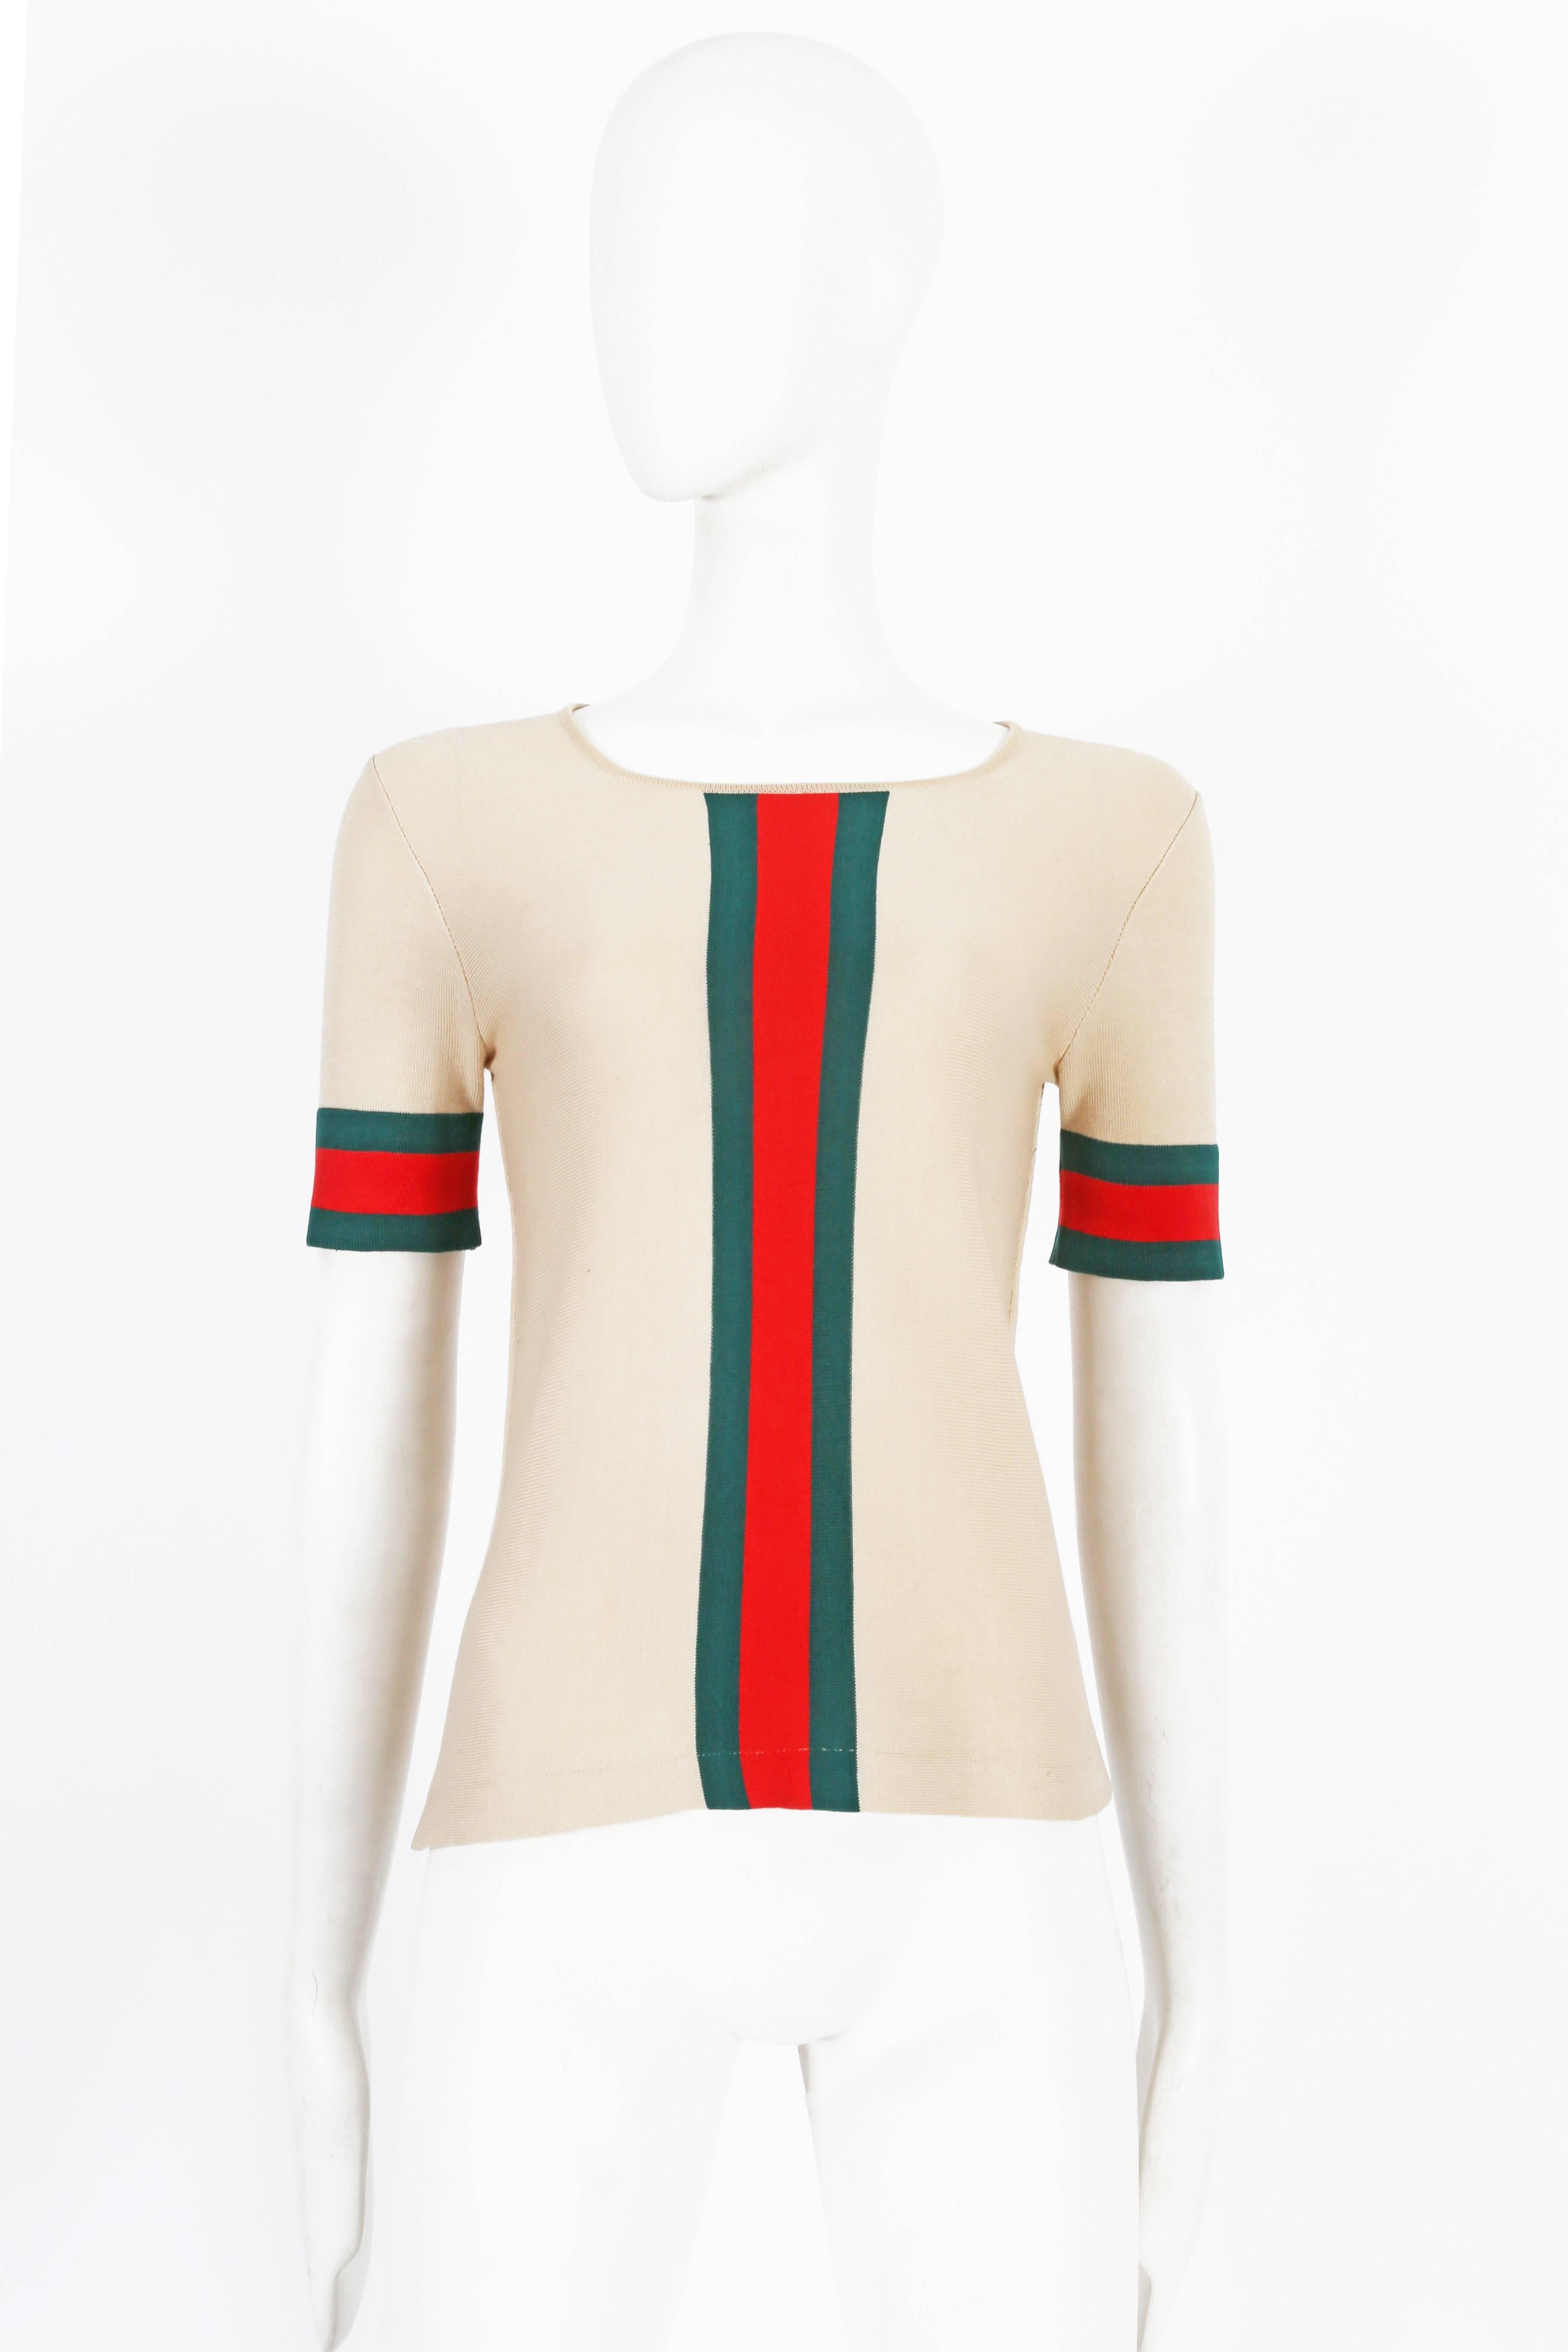 A rare knitted 1970s Gucci t-shirt featuring the iconic green and red stripe down the center front and cuffs.